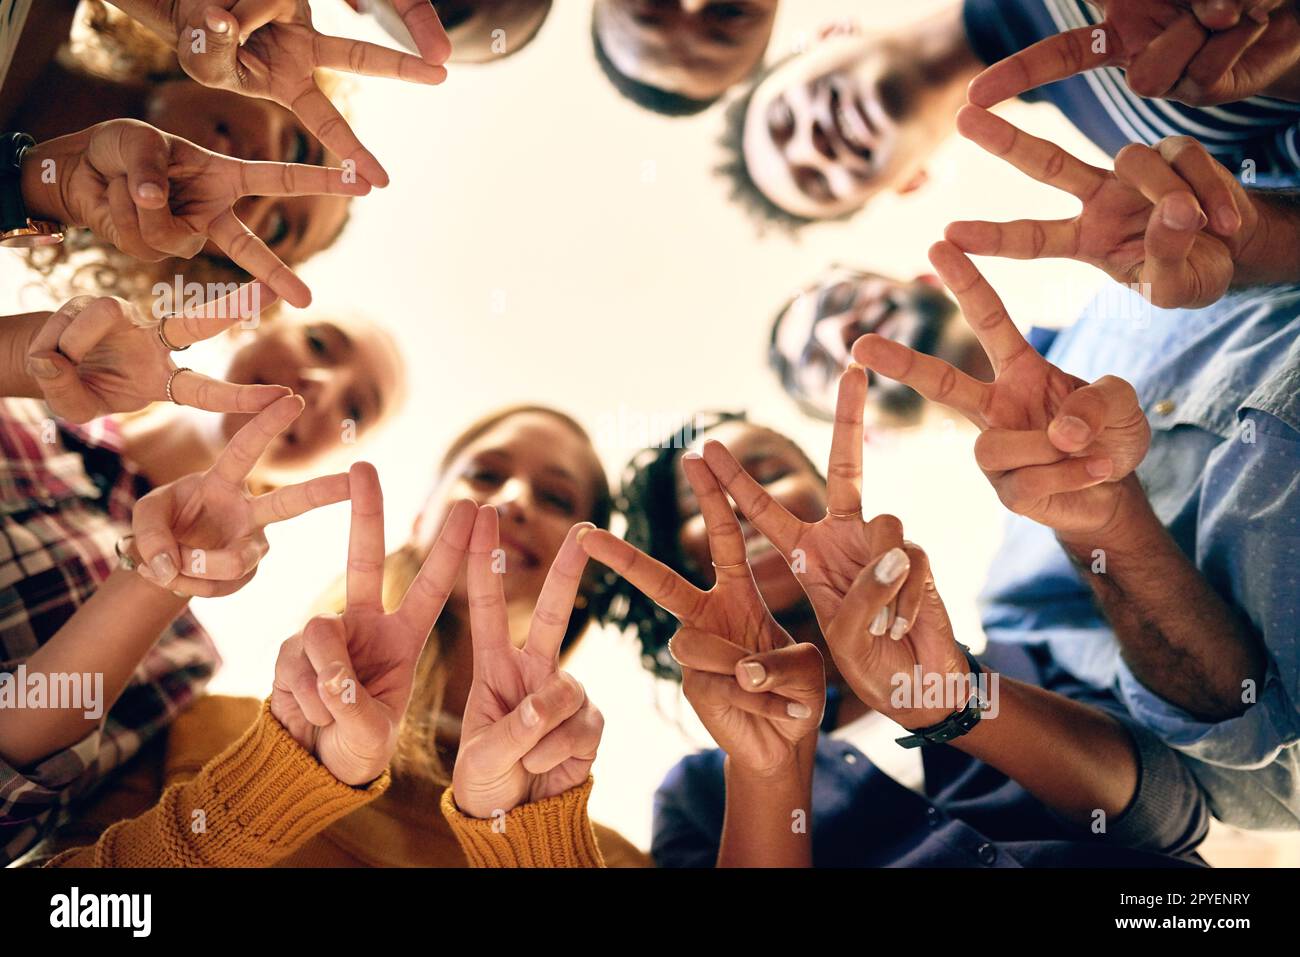 Spread the peace. Low angle shot of a group of people joining their hands together. Stock Photo